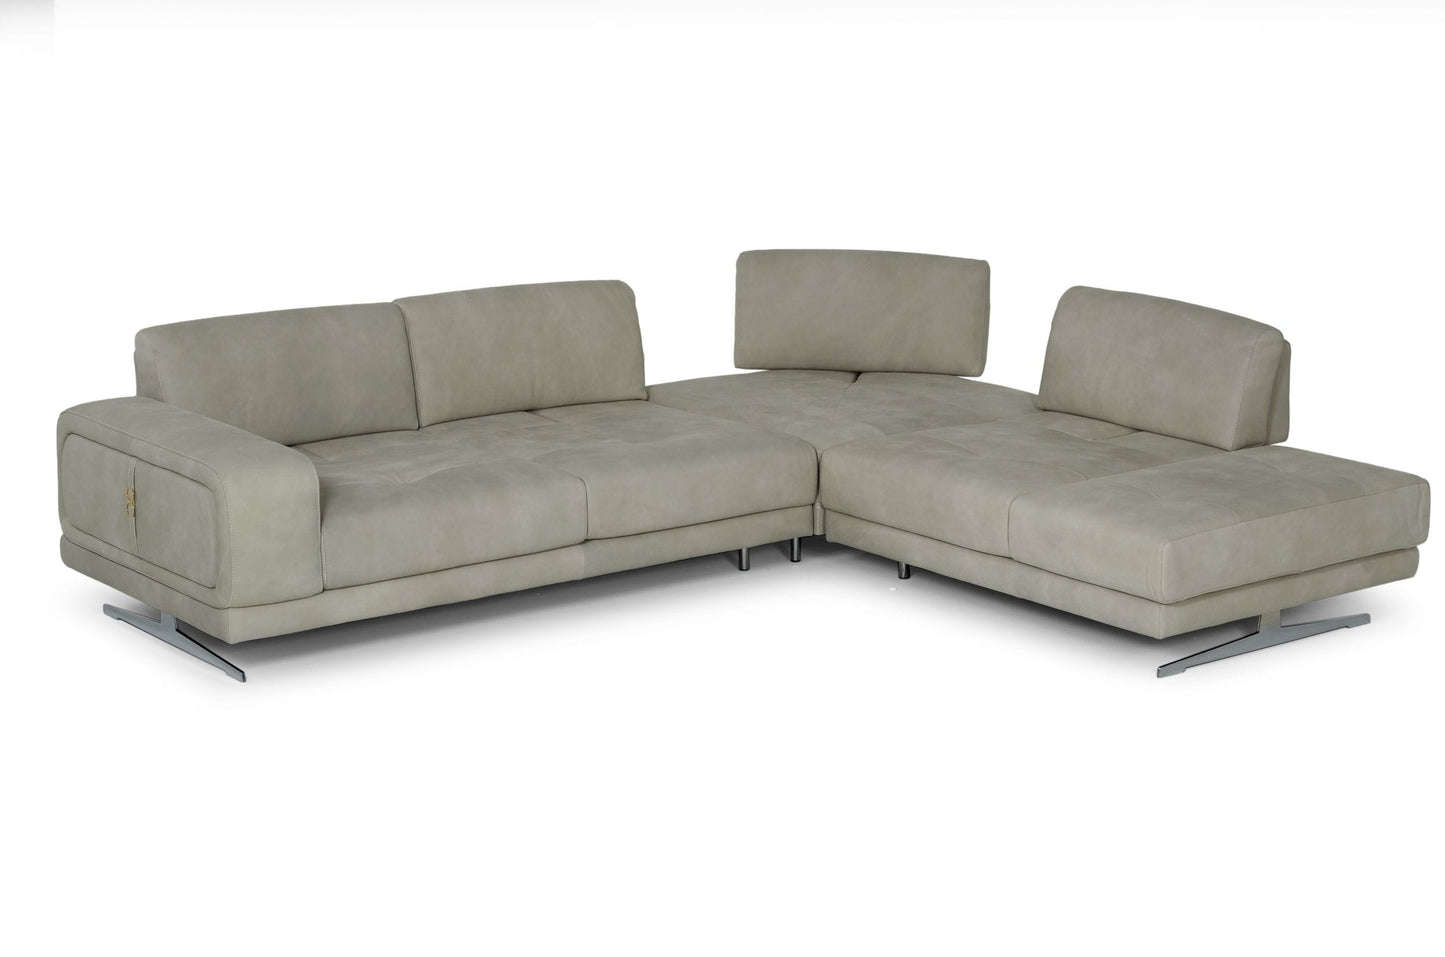 VIG Furniture Coronelli Mood Grey Cloud Leather Right Sectional Sofa